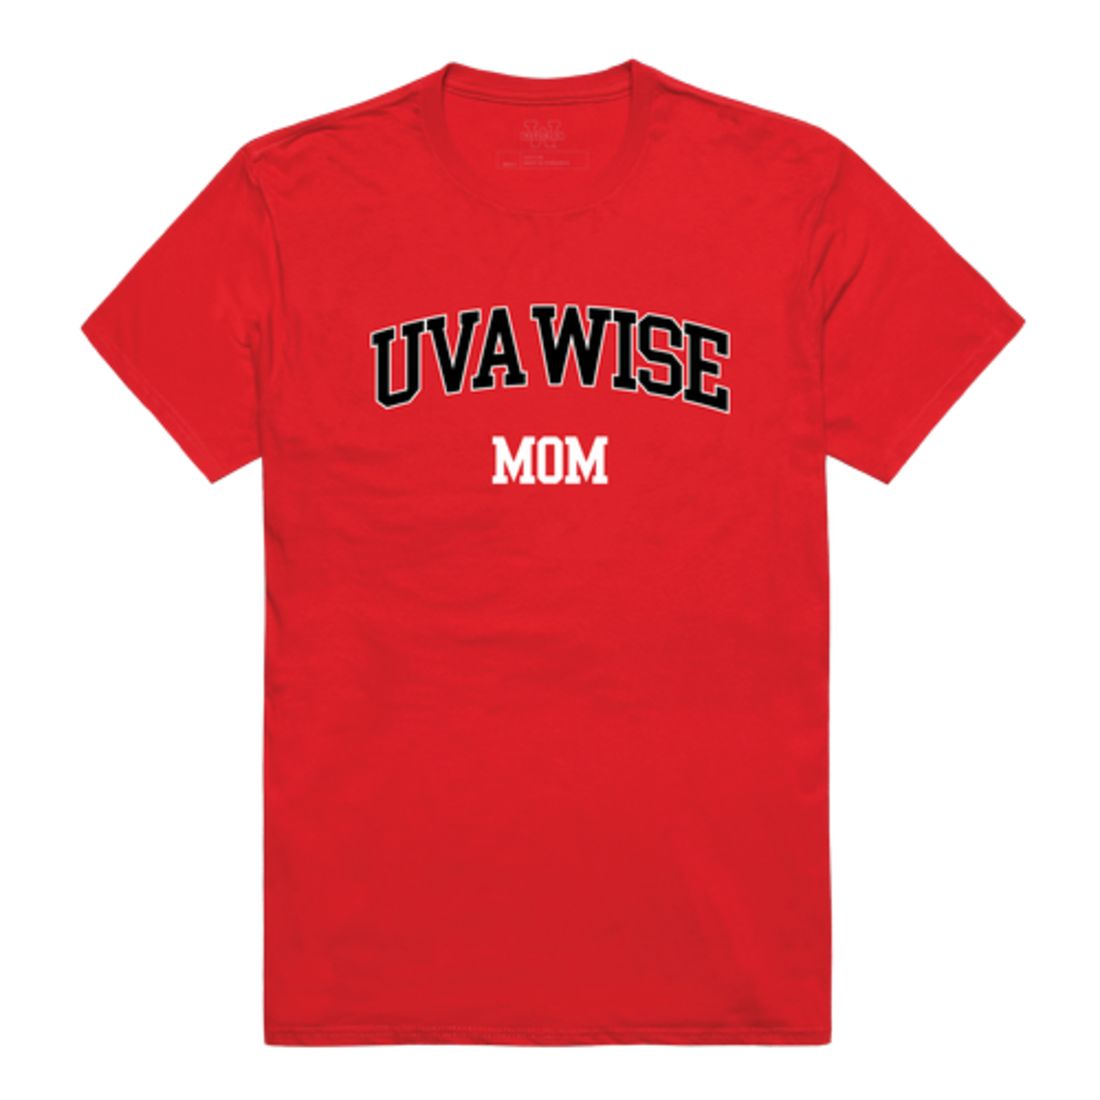 University of Virginia's College at Wise Cavaliers Mom T-Shirt